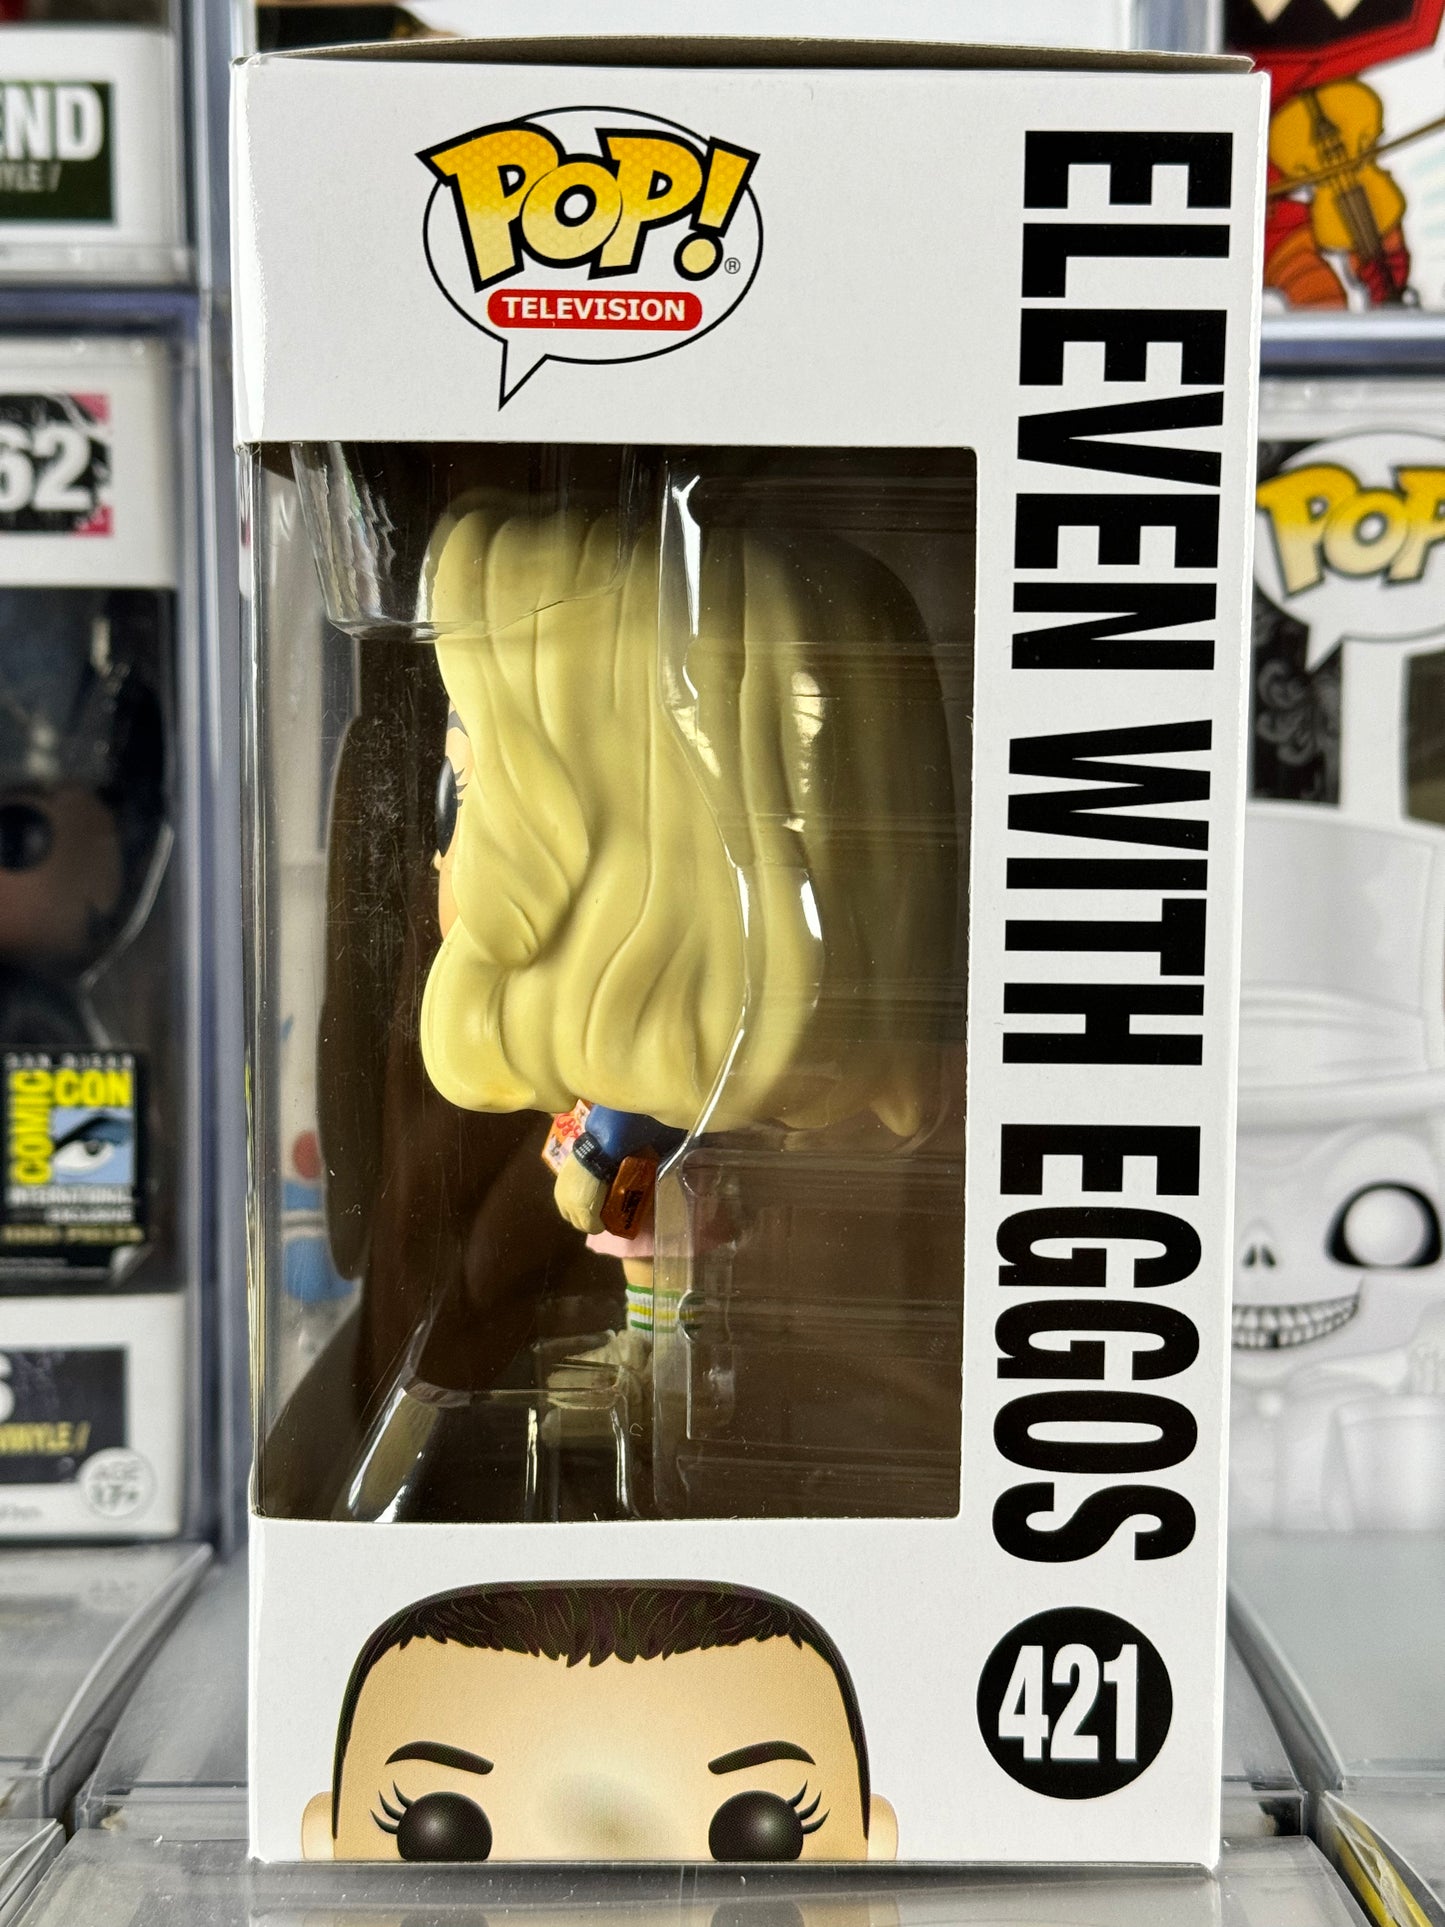 Stranger Things - Eleven with Eggos (421) CHASE